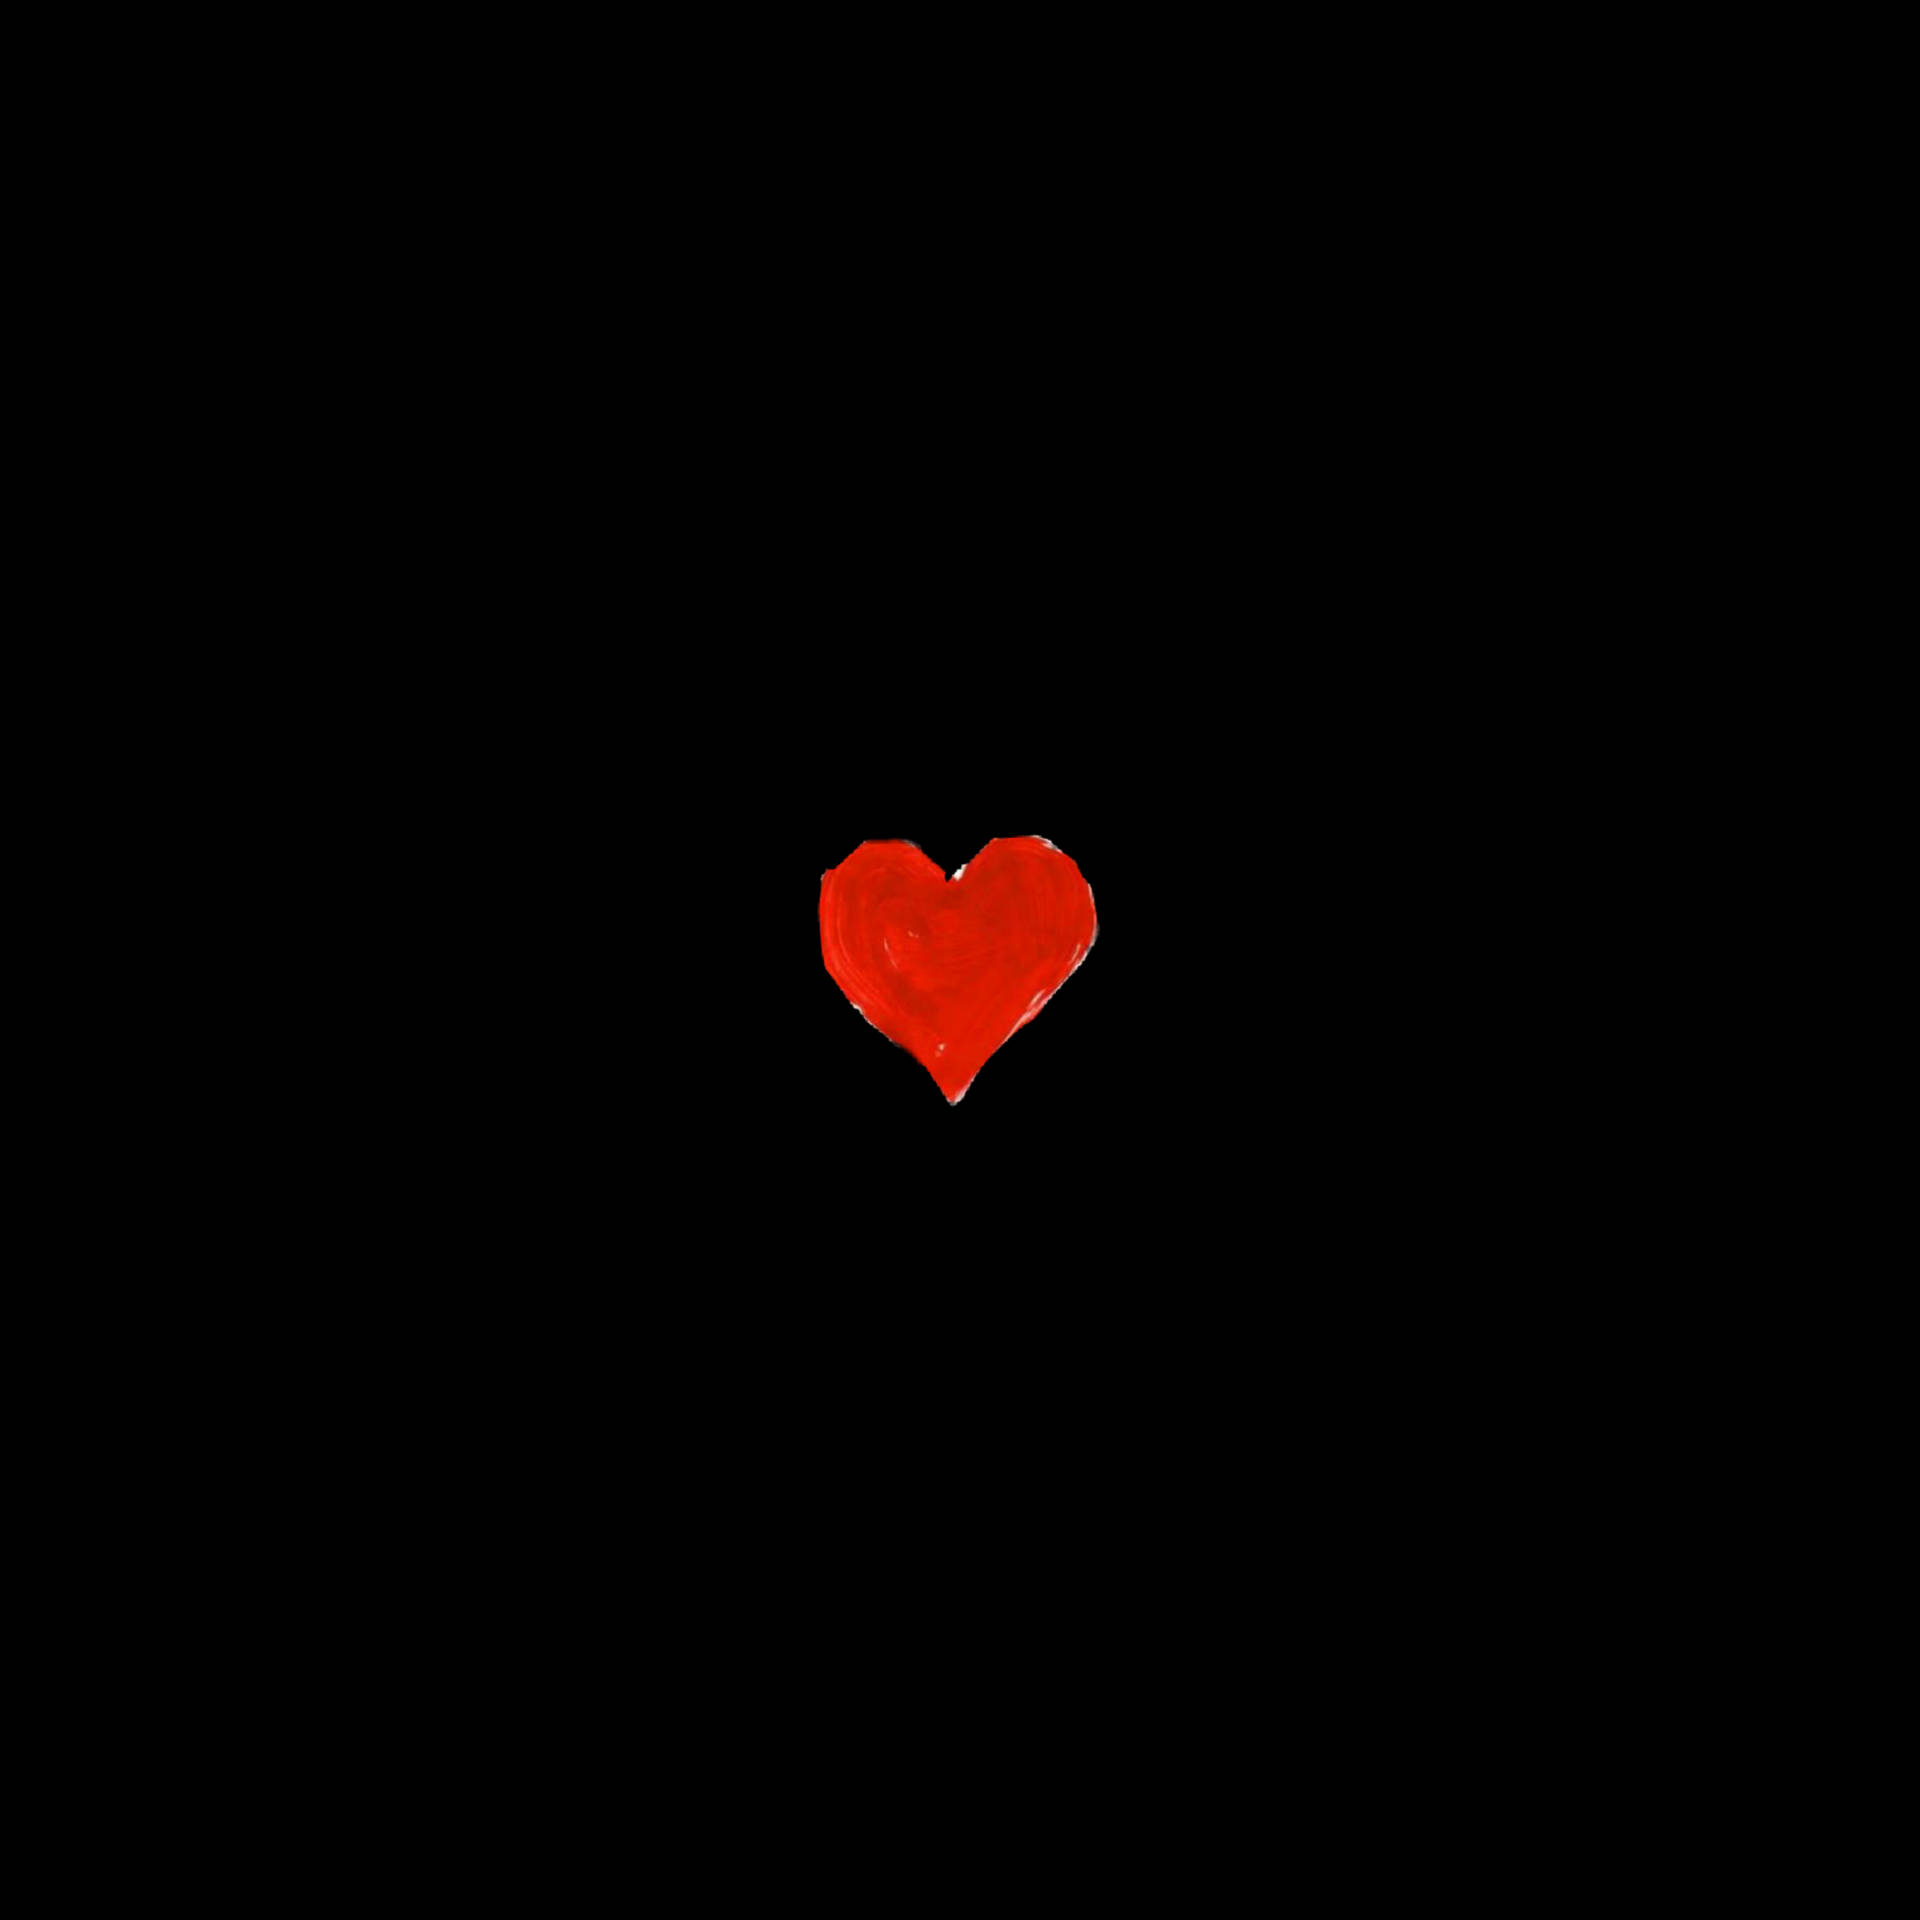 2289X2289 Heart Aesthetic Wallpaper and Background